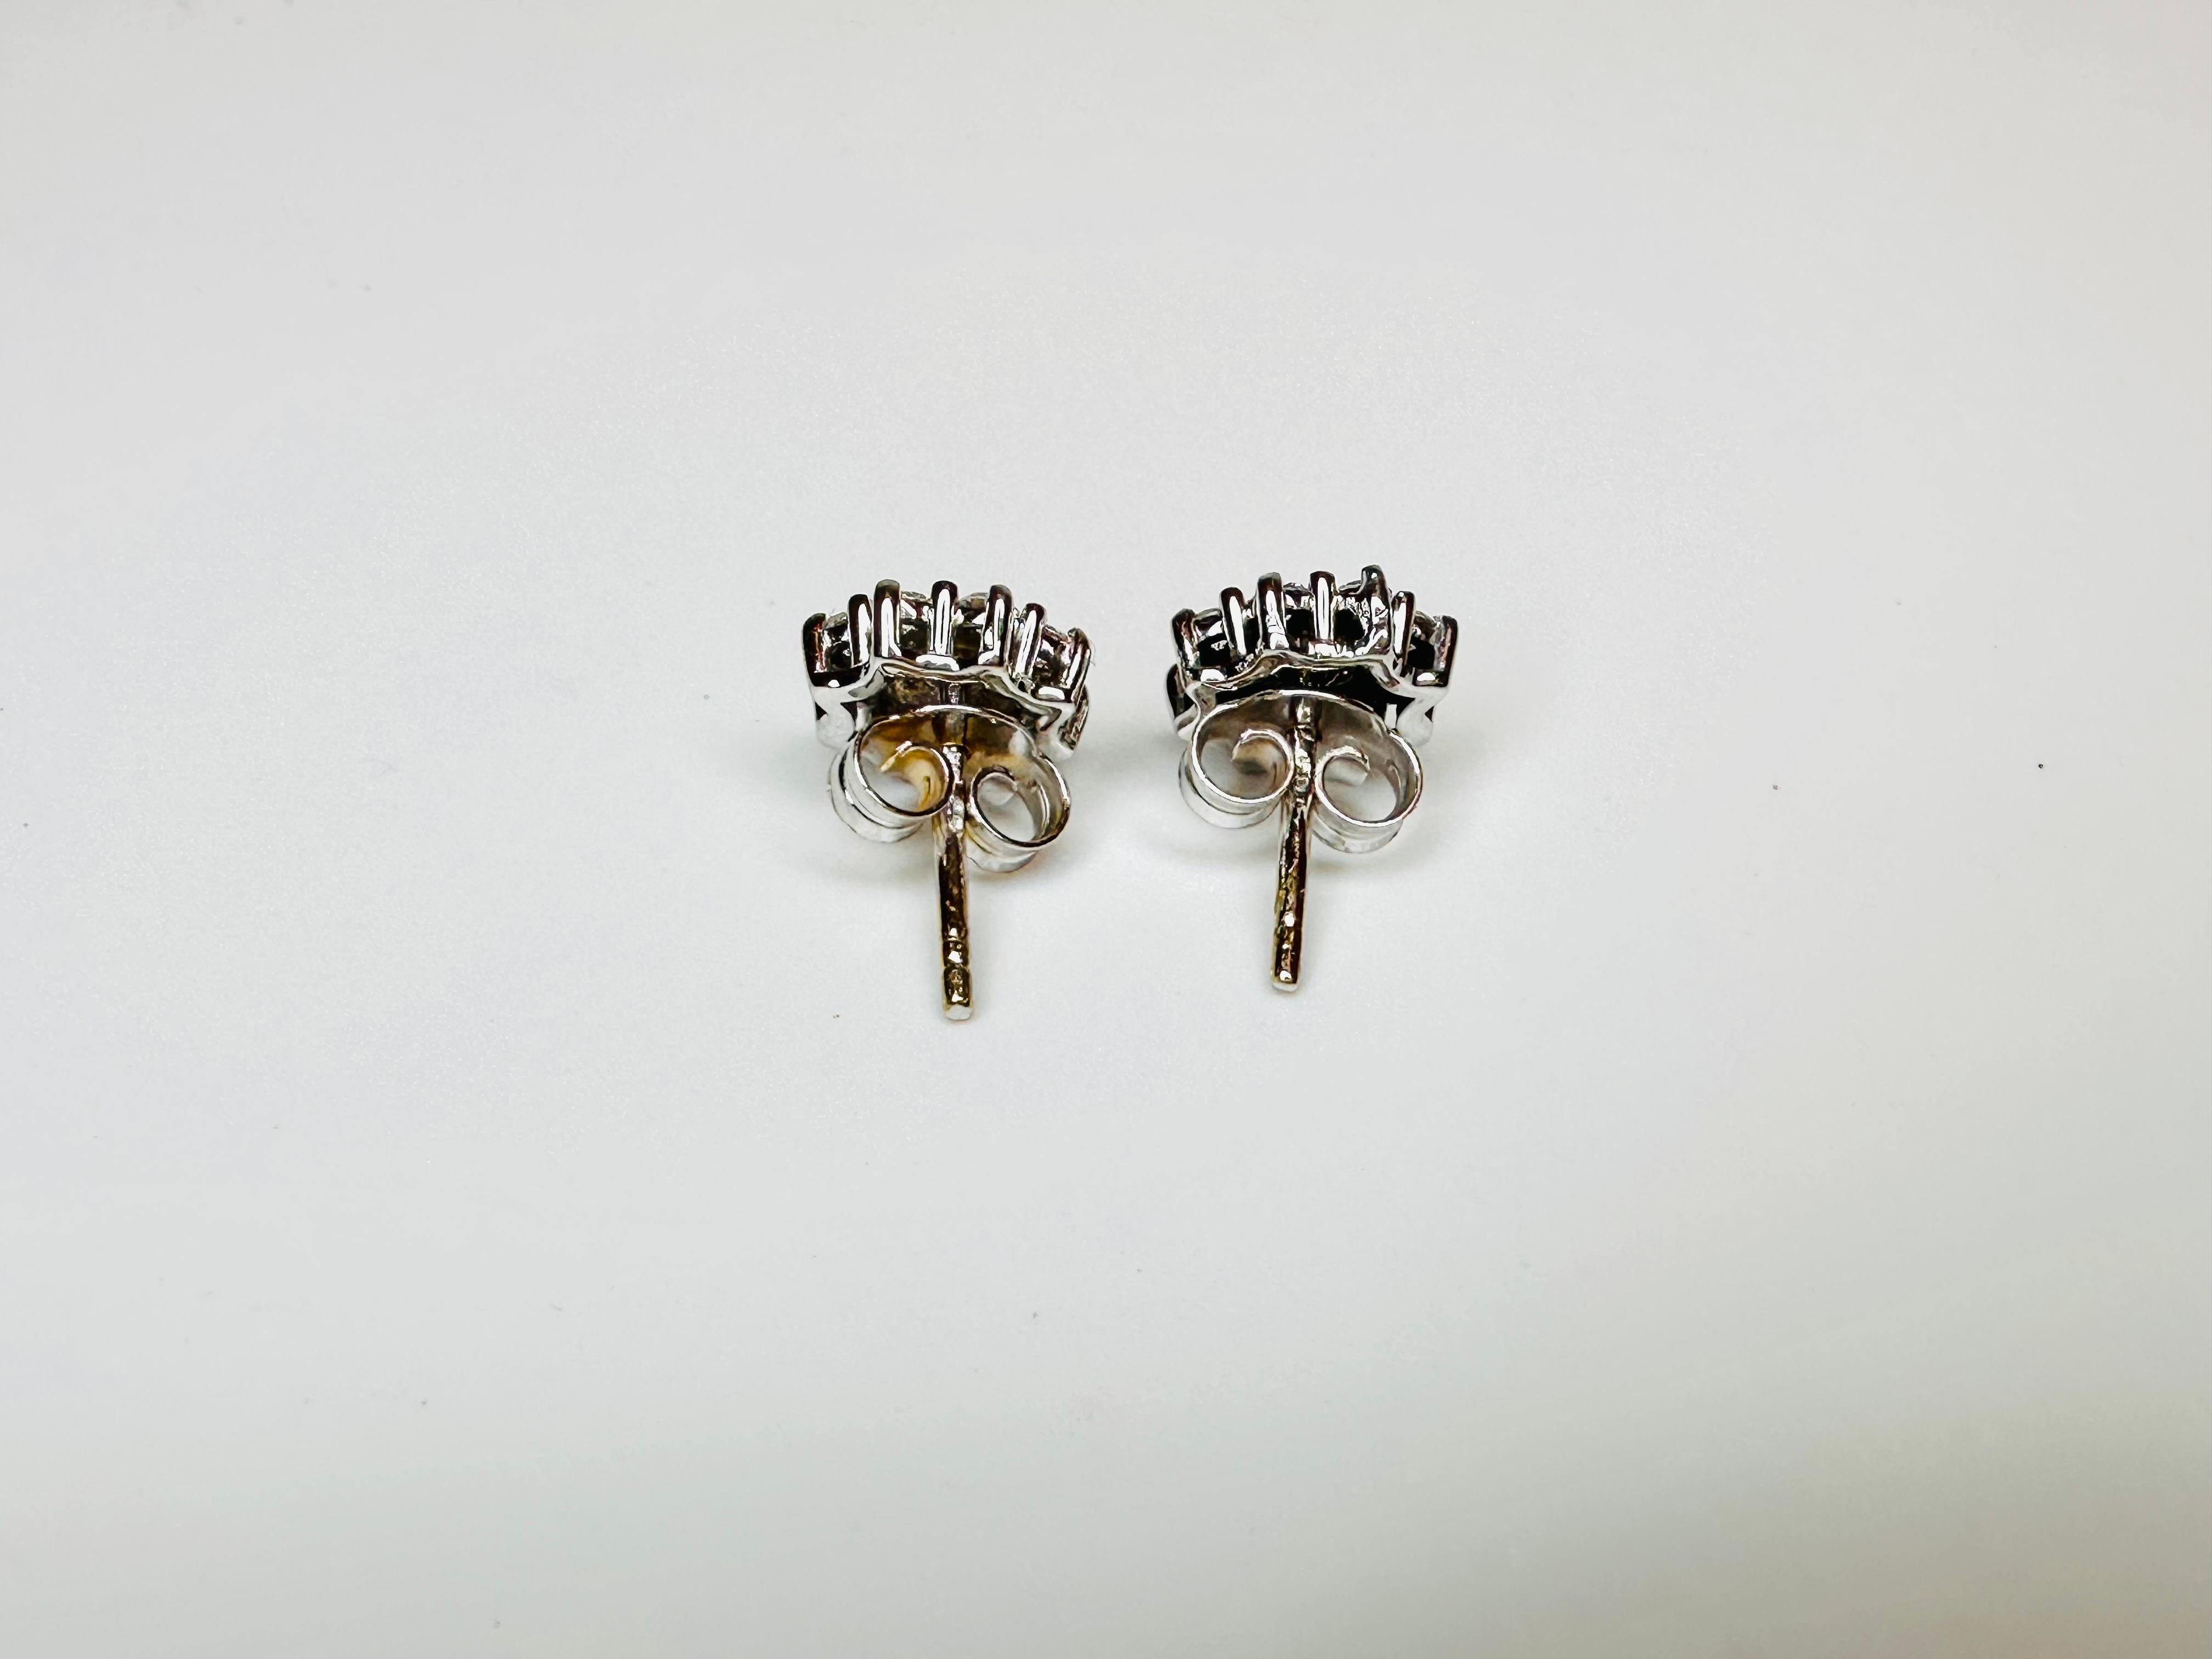 This beautiful and versatile set of stud earrings looks like a large diamond from a small distance, but has 34 brilliant round diamonds in 2 different sizes: 16 diamonds measuring 1.3mm in diameter and 18 diamonds measuring 1.8mm , for a total of